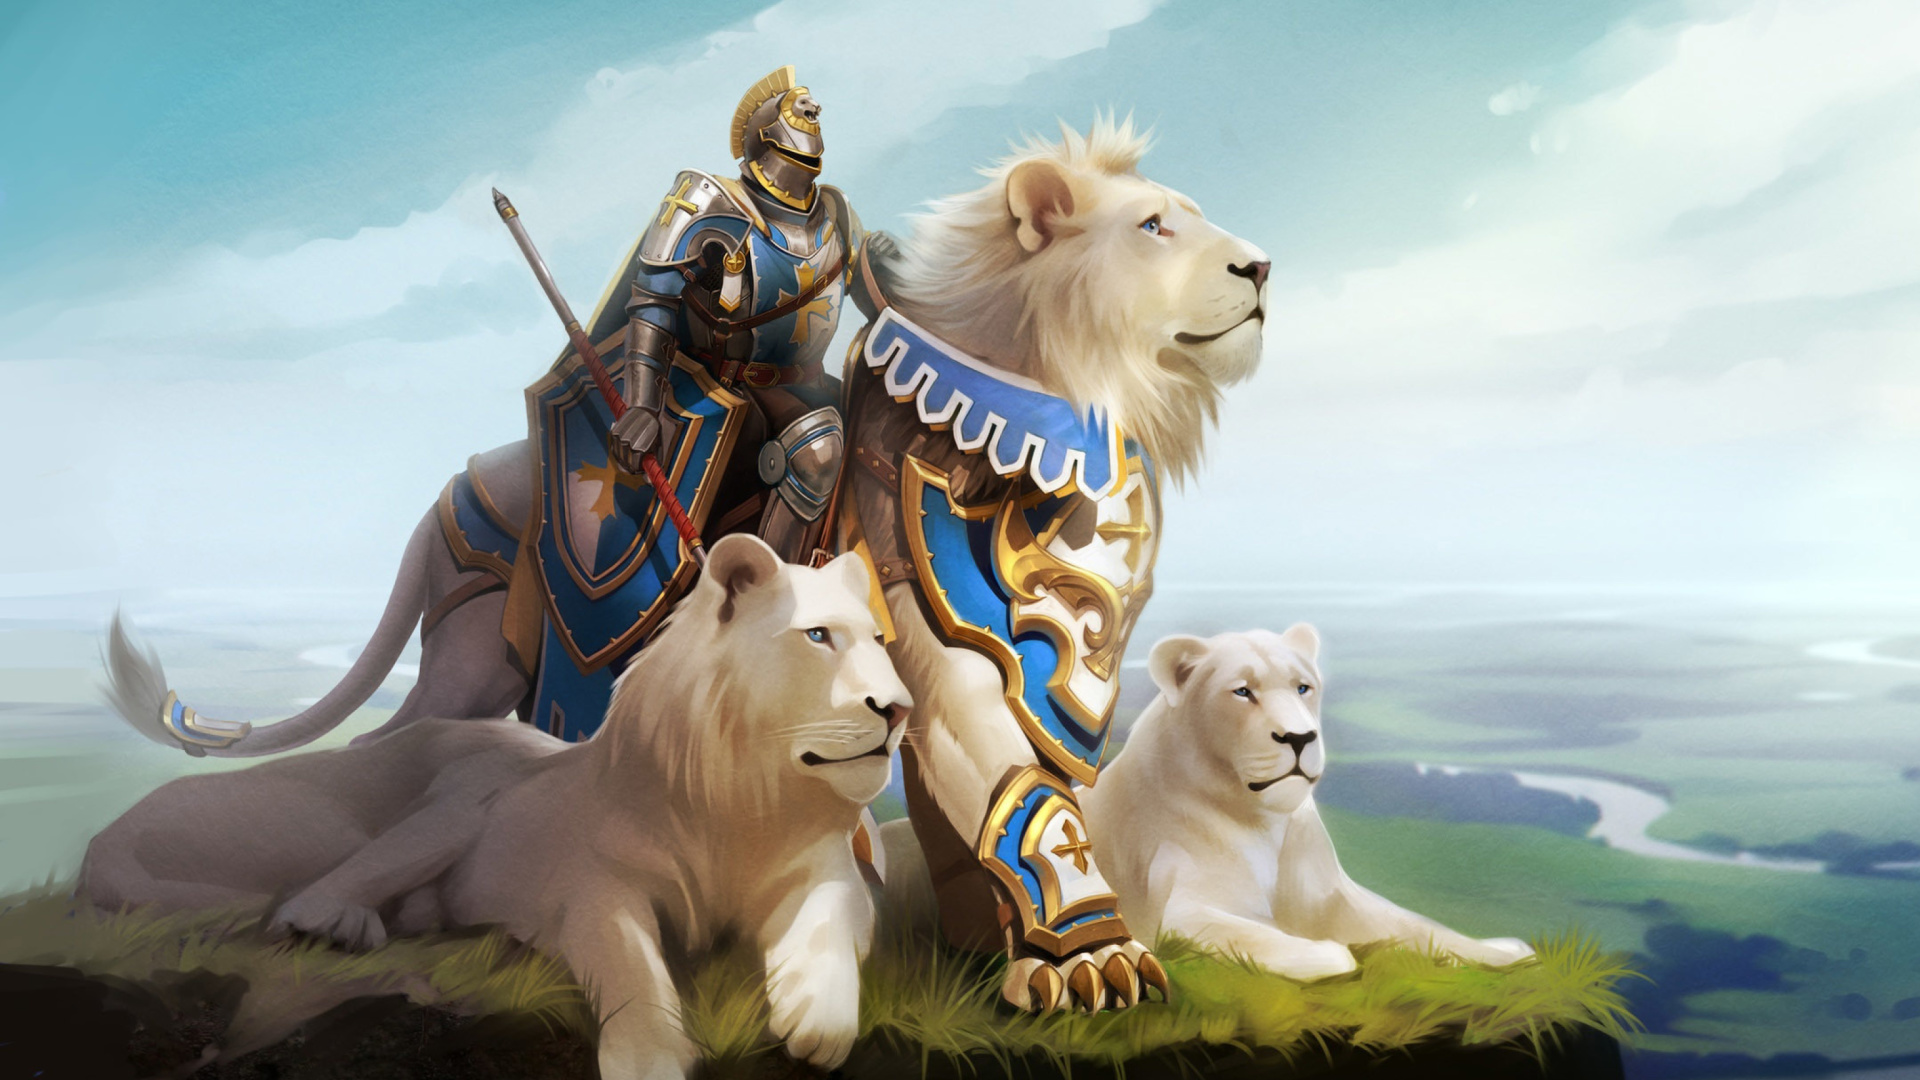 Knight with Lions wallpaper 1920x1080